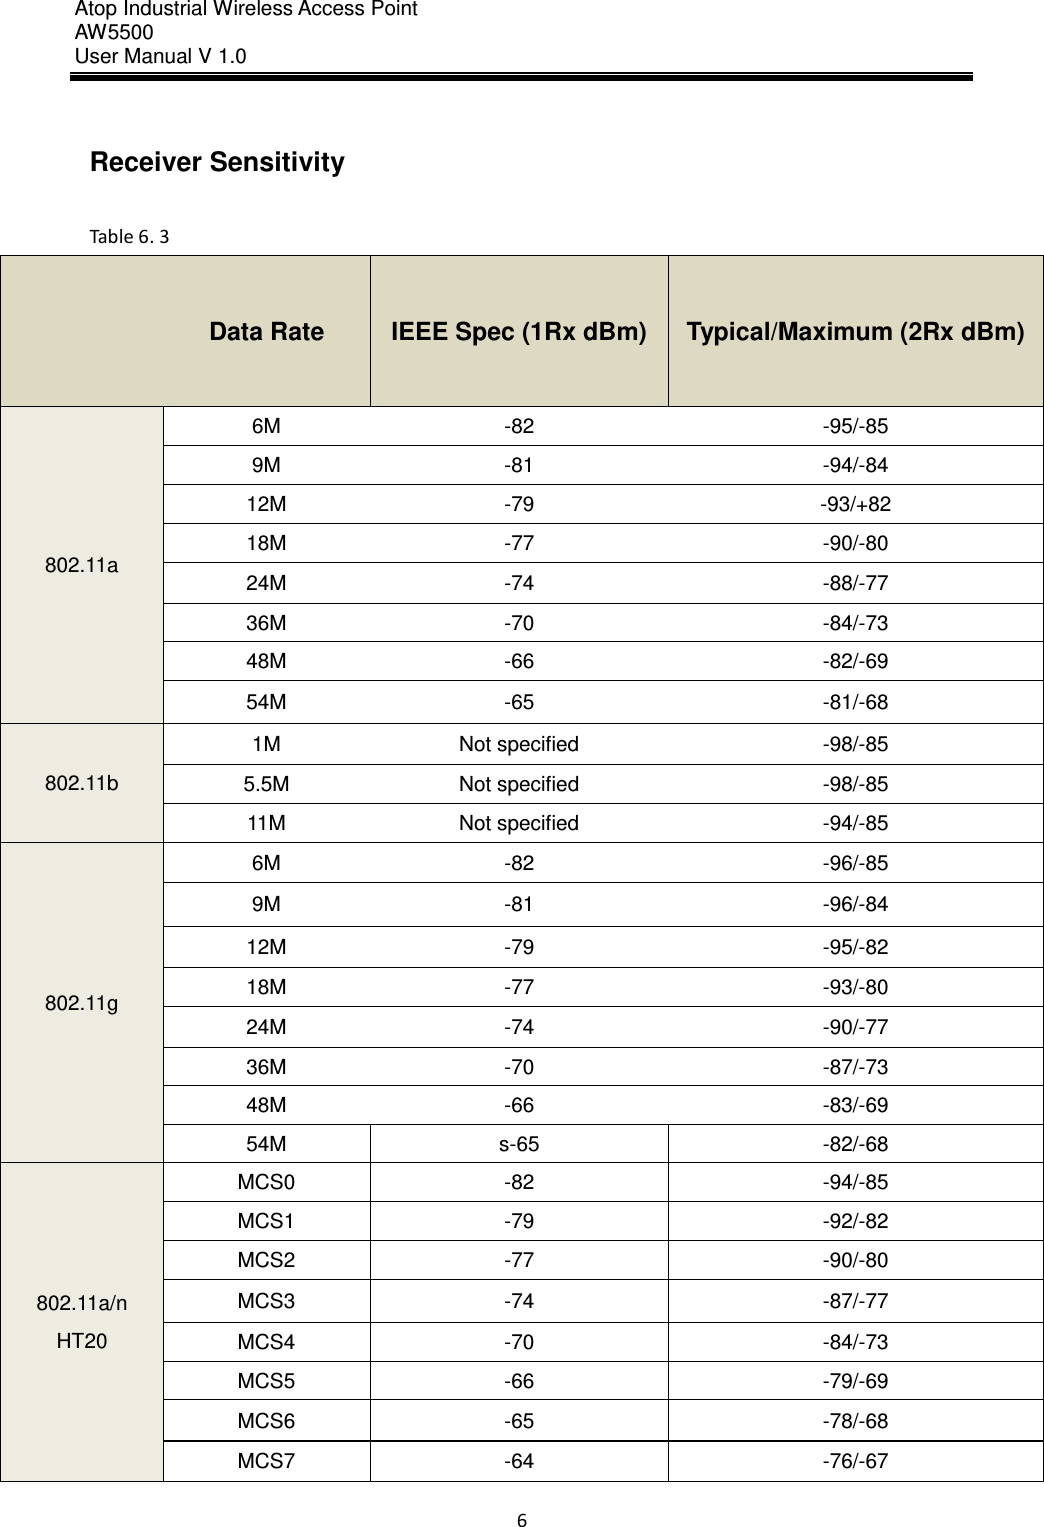 Atop Industrial Wireless Access Point AW 5500 User Manual V 1.0                      6   Receiver Sensitivity  Table 6. 3  Data Rate IEEE Spec (1Rx dBm) Typical/Maximum (2Rx dBm) 802.11a 6M -82 -95/-85 9M -81 -94/-84 12M -79 -93/+82 18M -77 -90/-80 24M -74 -88/-77 36M -70 -84/-73 48M -66 -82/-69 54M -65 -81/-68 802.11b 1M Not specified -98/-85 5.5M Not specified -98/-85 11M Not specified -94/-85 802.11g 6M -82 -96/-85 9M -81 -96/-84 12M -79 -95/-82 18M -77 -93/-80 24M -74 -90/-77 36M -70 -87/-73 48M -66 -83/-69 54M s-65 -82/-68 802.11a/n HT20 MCS0 -82 -94/-85 MCS1 -79 -92/-82 MCS2 -77 -90/-80 MCS3 -74 -87/-77 MCS4 -70 -84/-73 MCS5 -66 -79/-69 MCS6 -65 -78/-68 MCS7 -64 -76/-67 